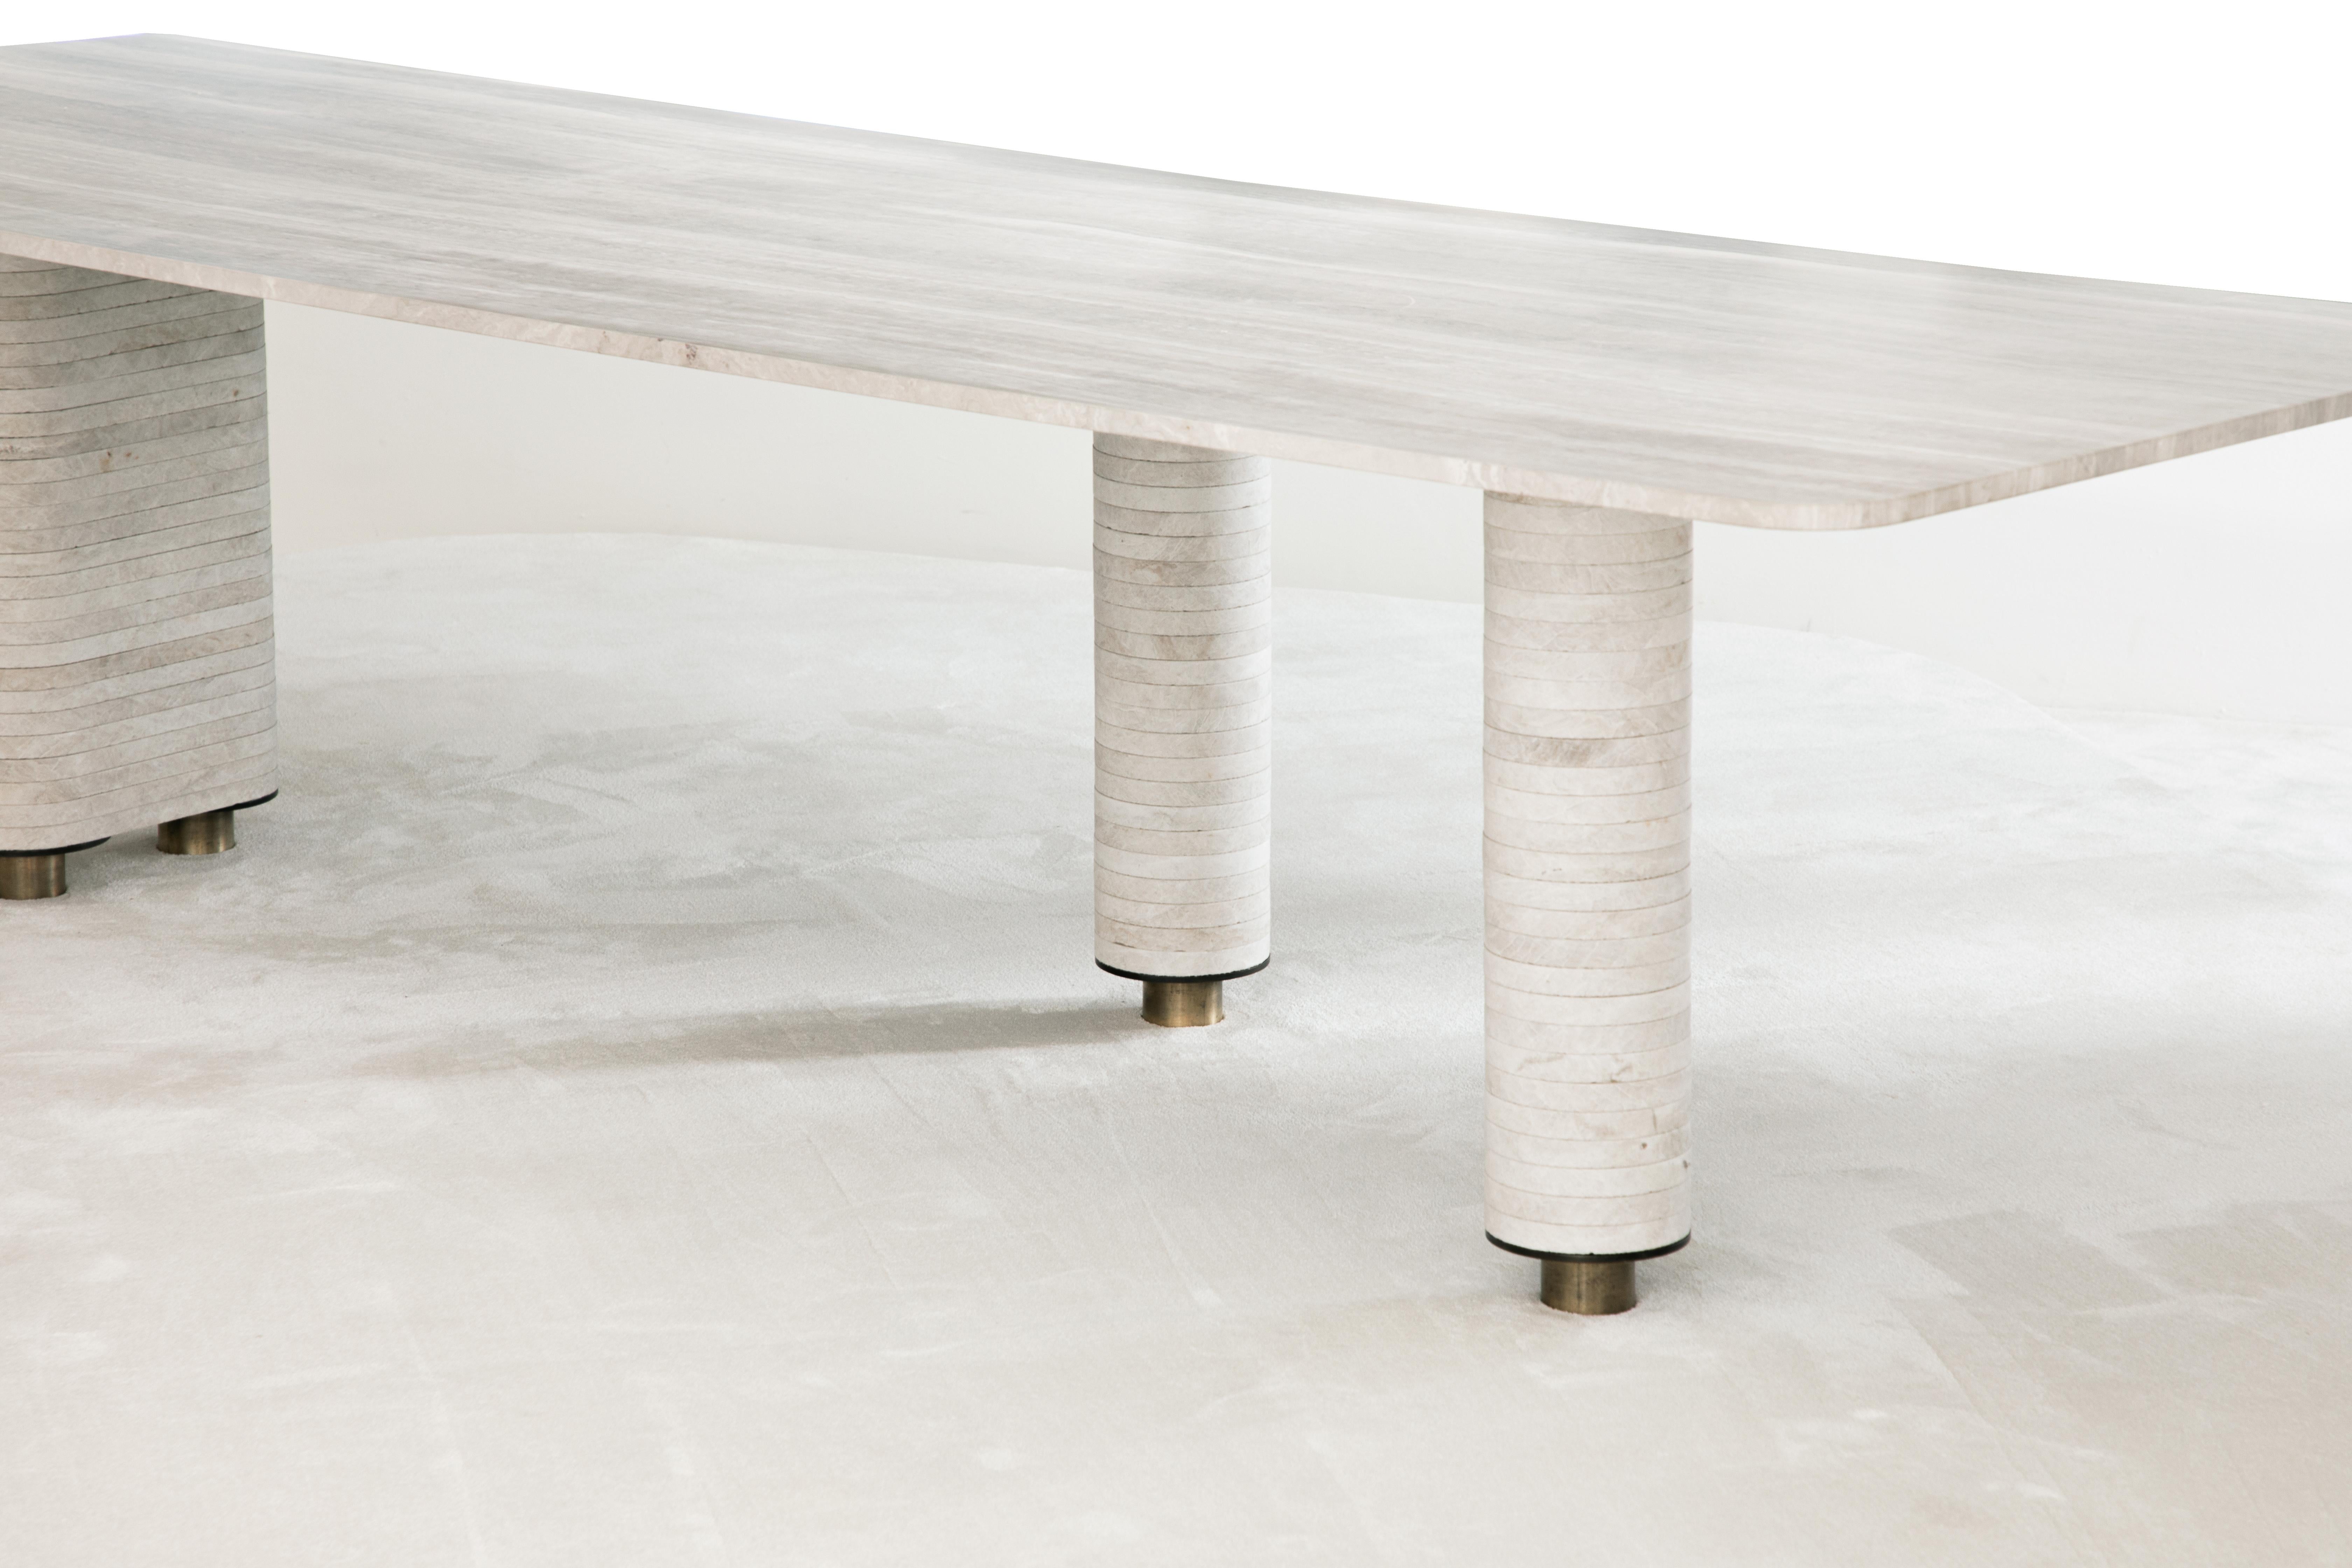 Mexican Aro Dining Table by Atra Design